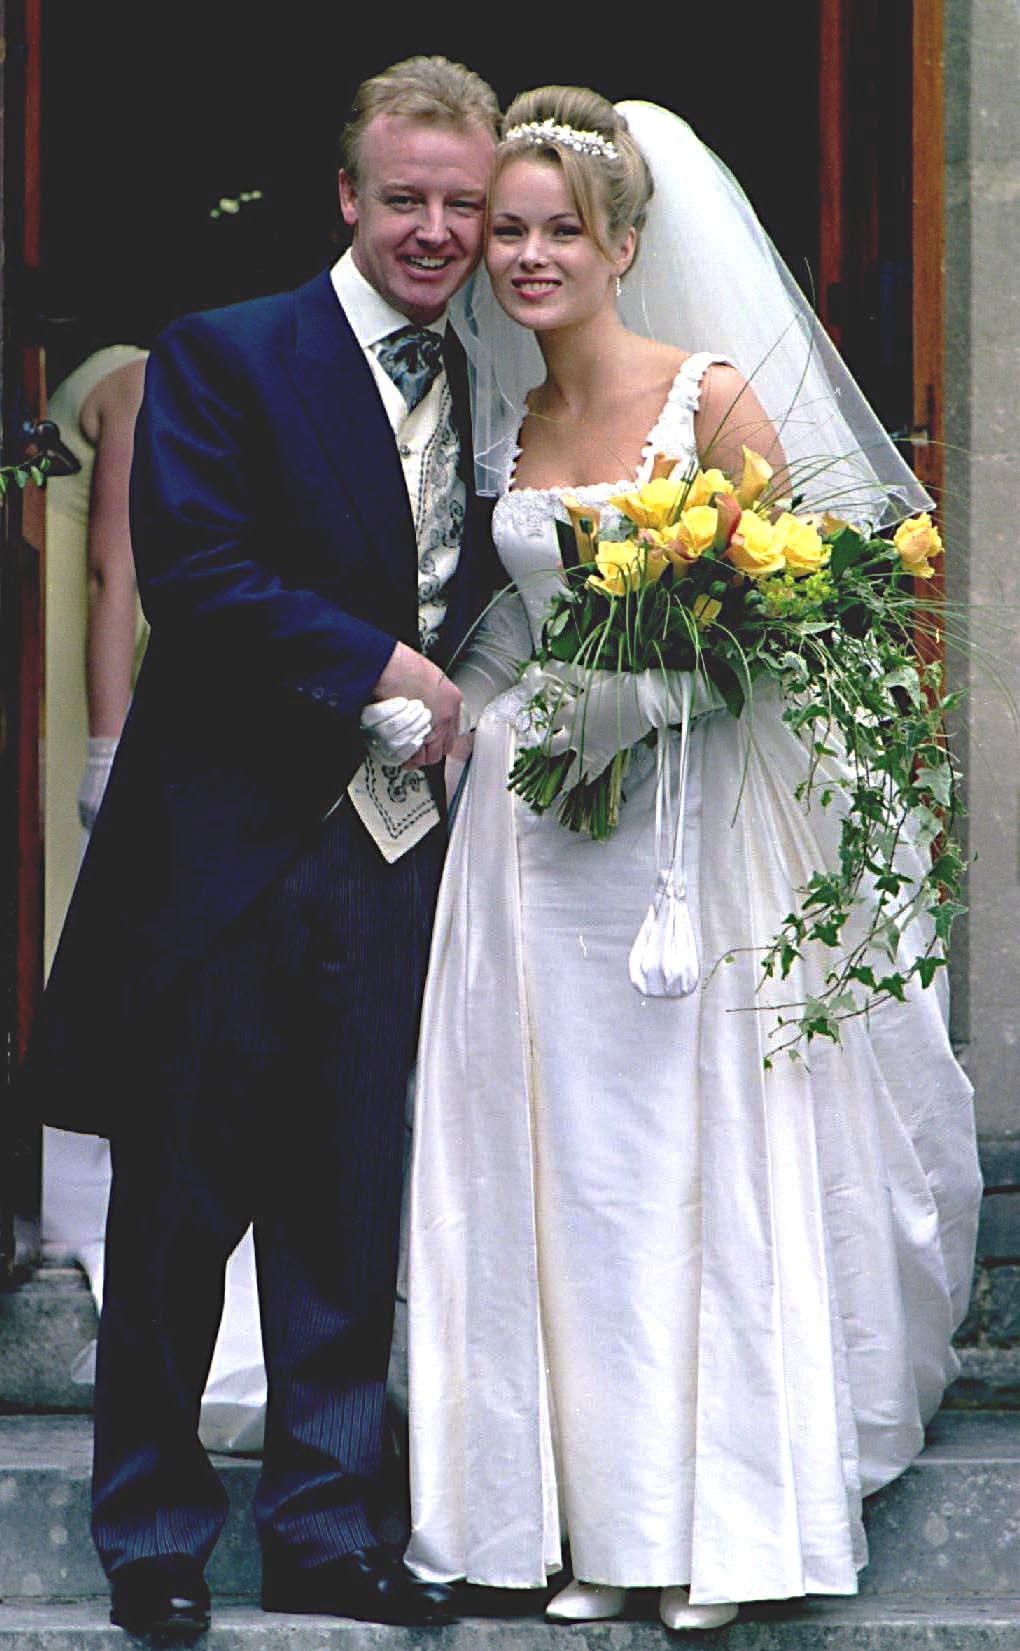 Les Dennis and Amanda Holden after their wedding ceremony